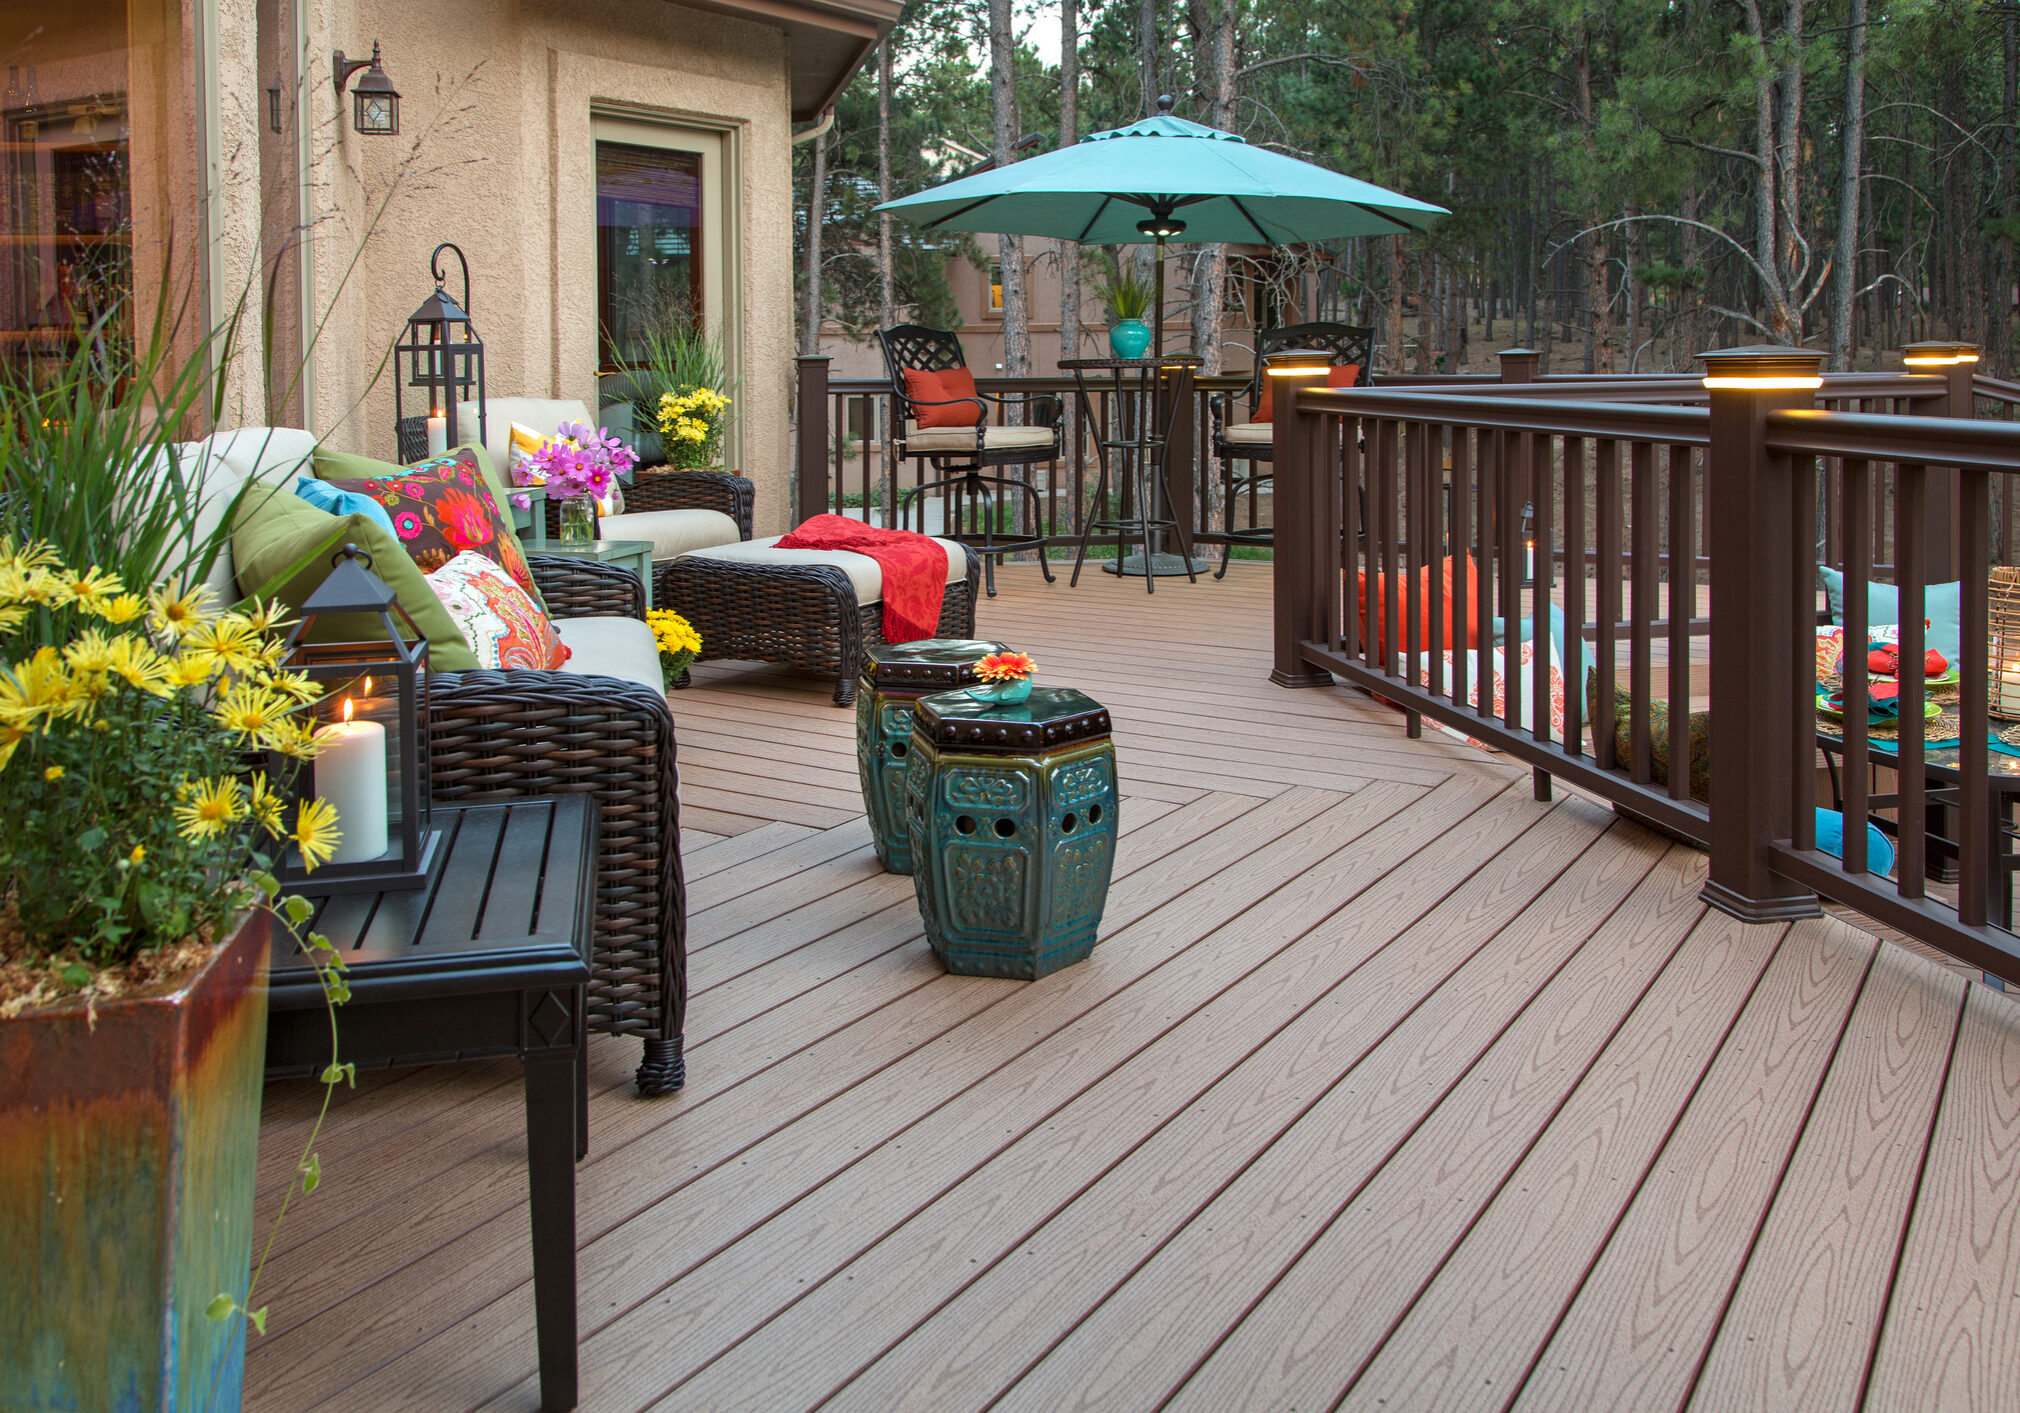 Beautiful backyard deck with built-in lighting and fully decorated with vibrant and colorful furniture and decor